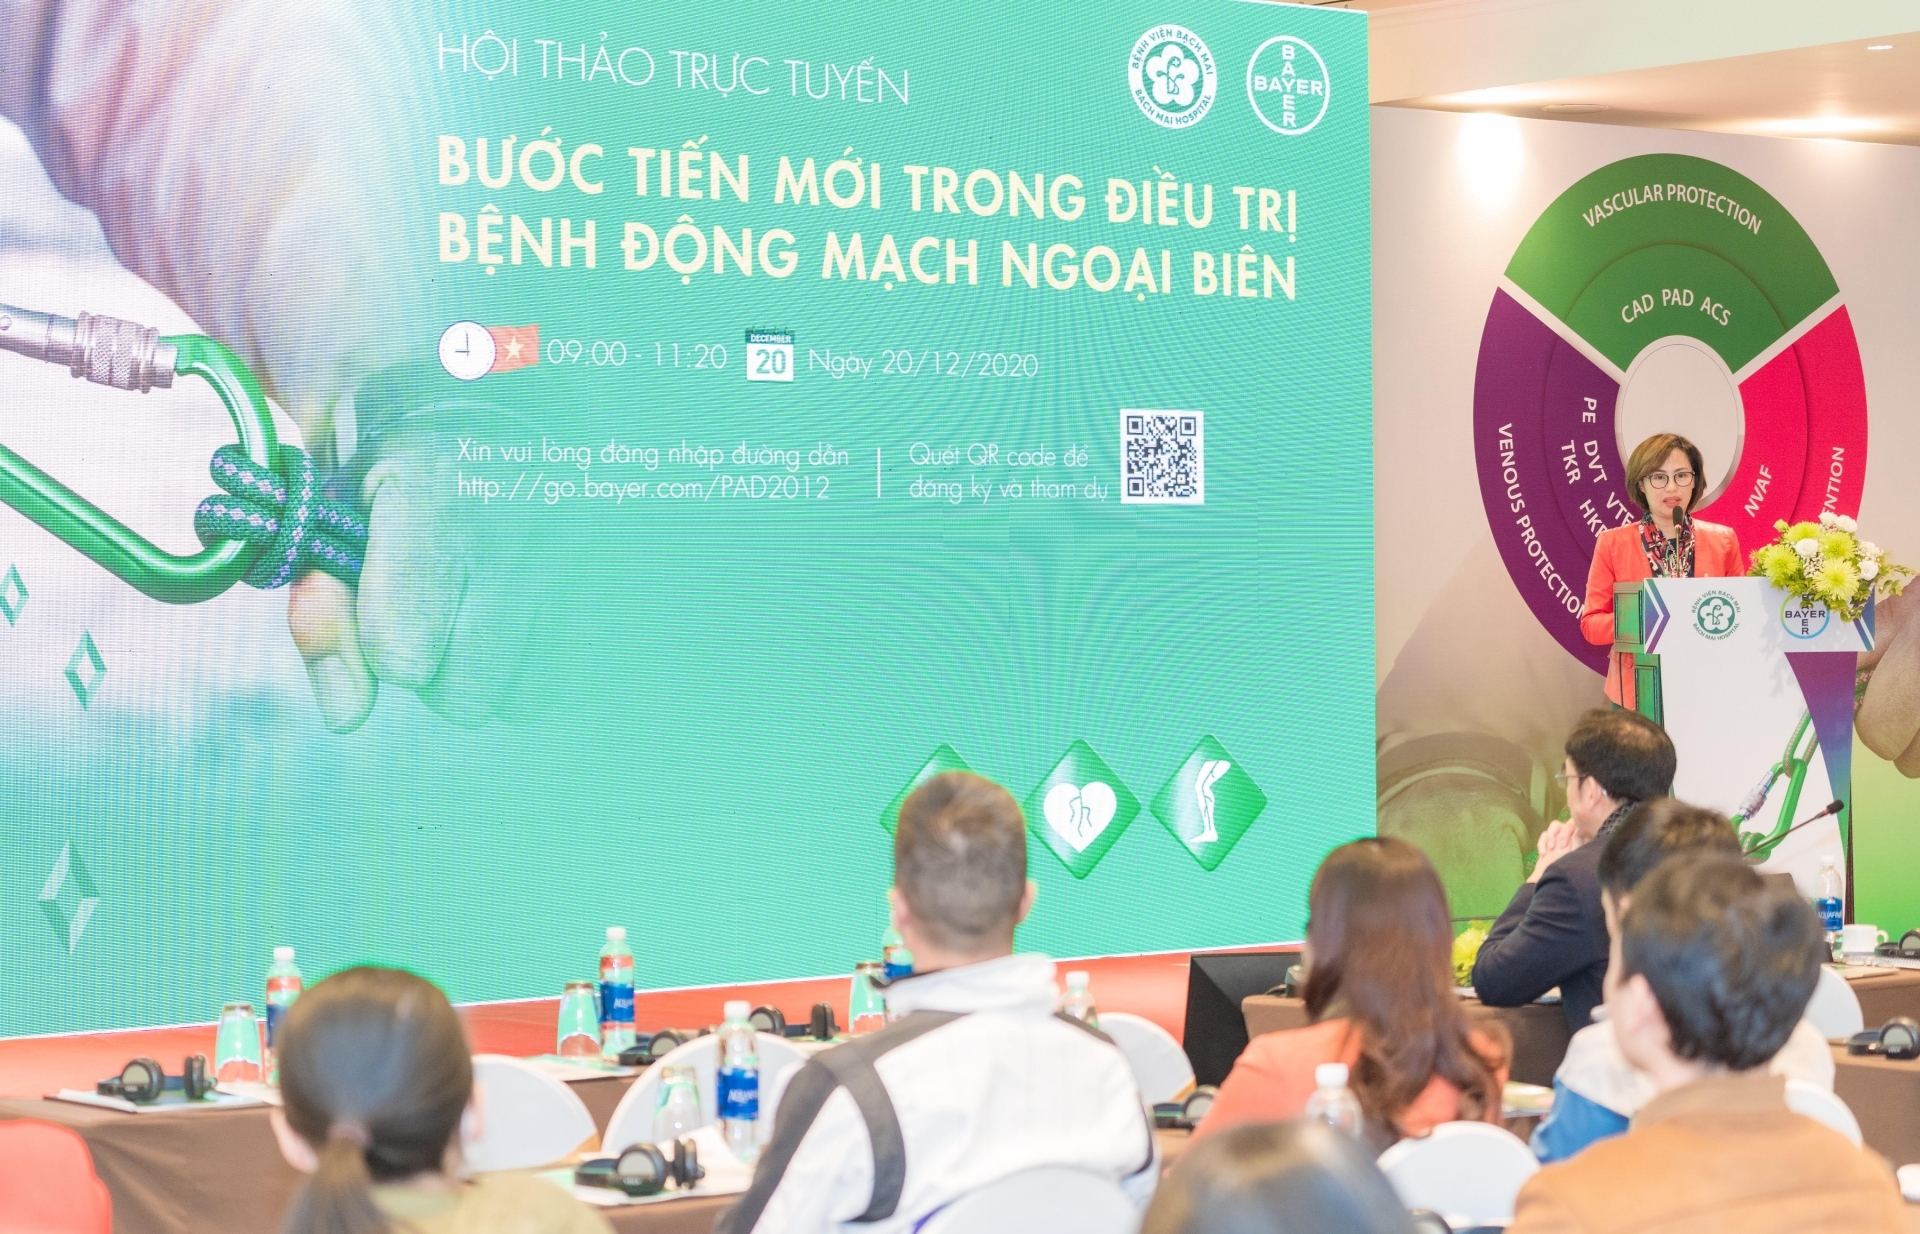 Bayer Vietnam leads advances in management of peripheral artery disease